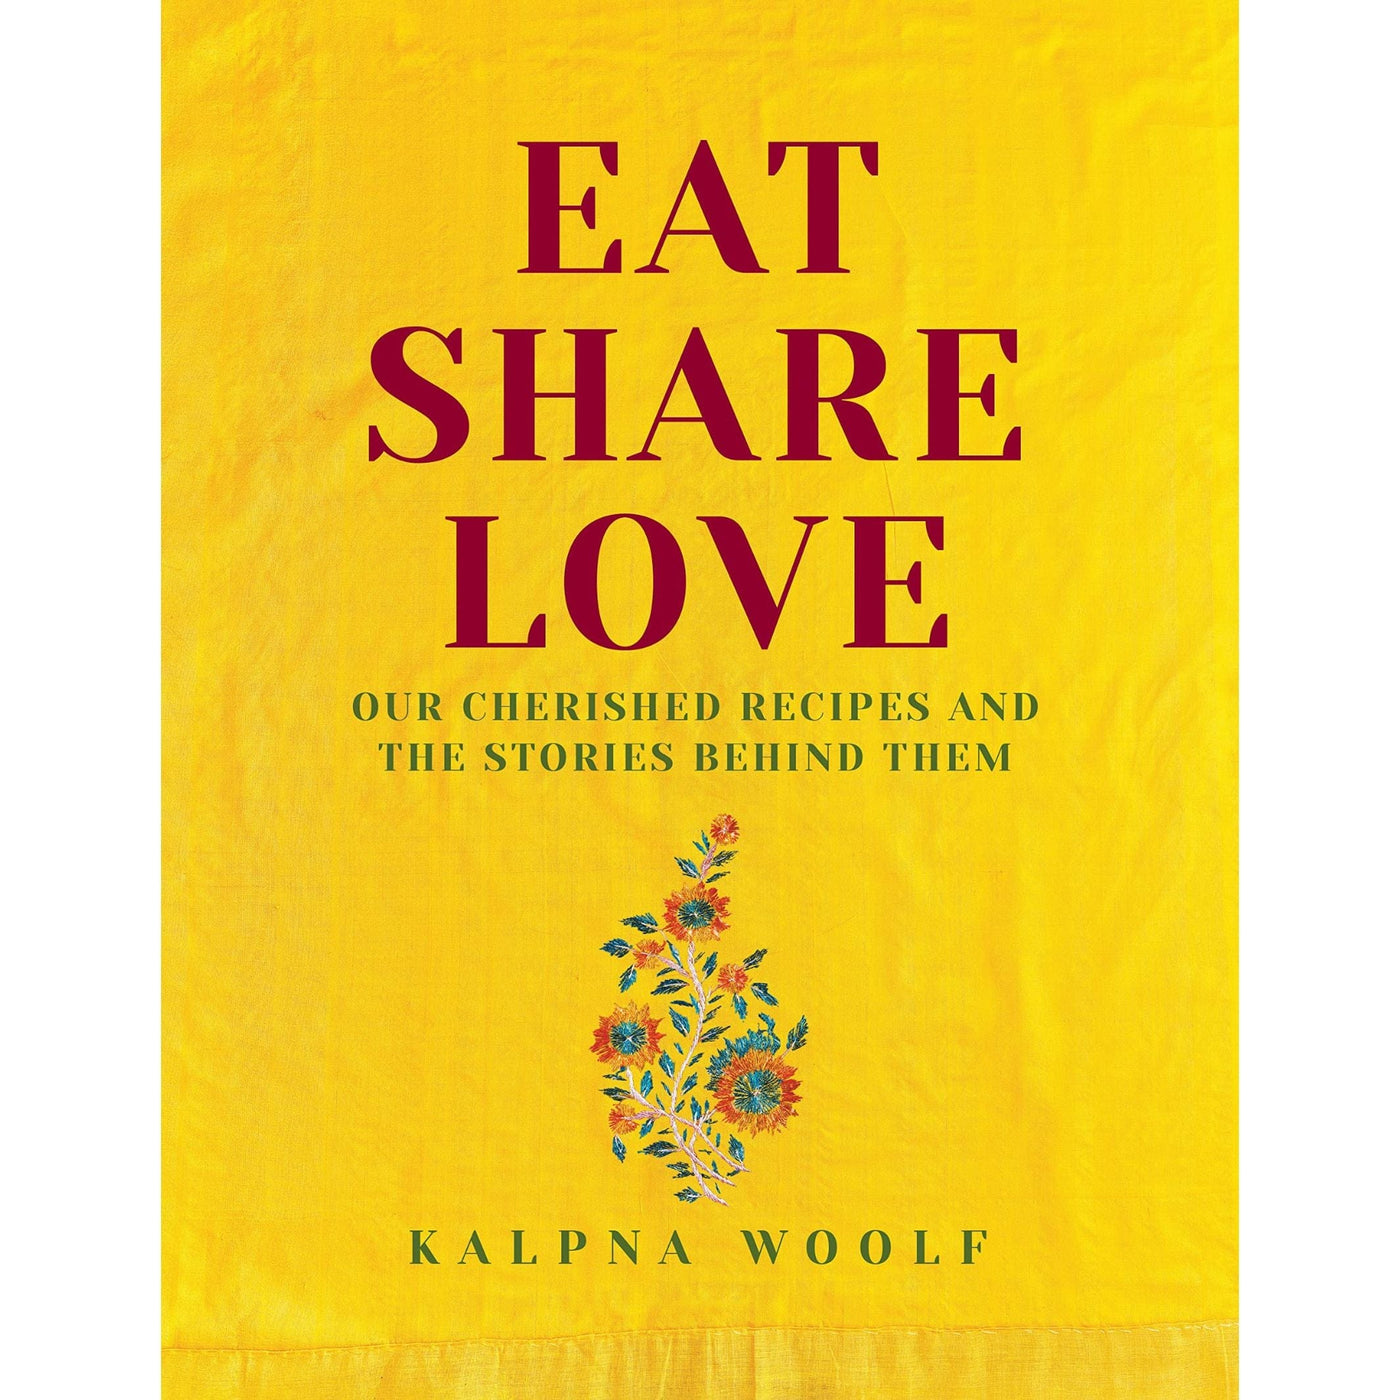 Kalpna Woolf: Eat, Share, Love: Our cherished recipes and the stories behind them